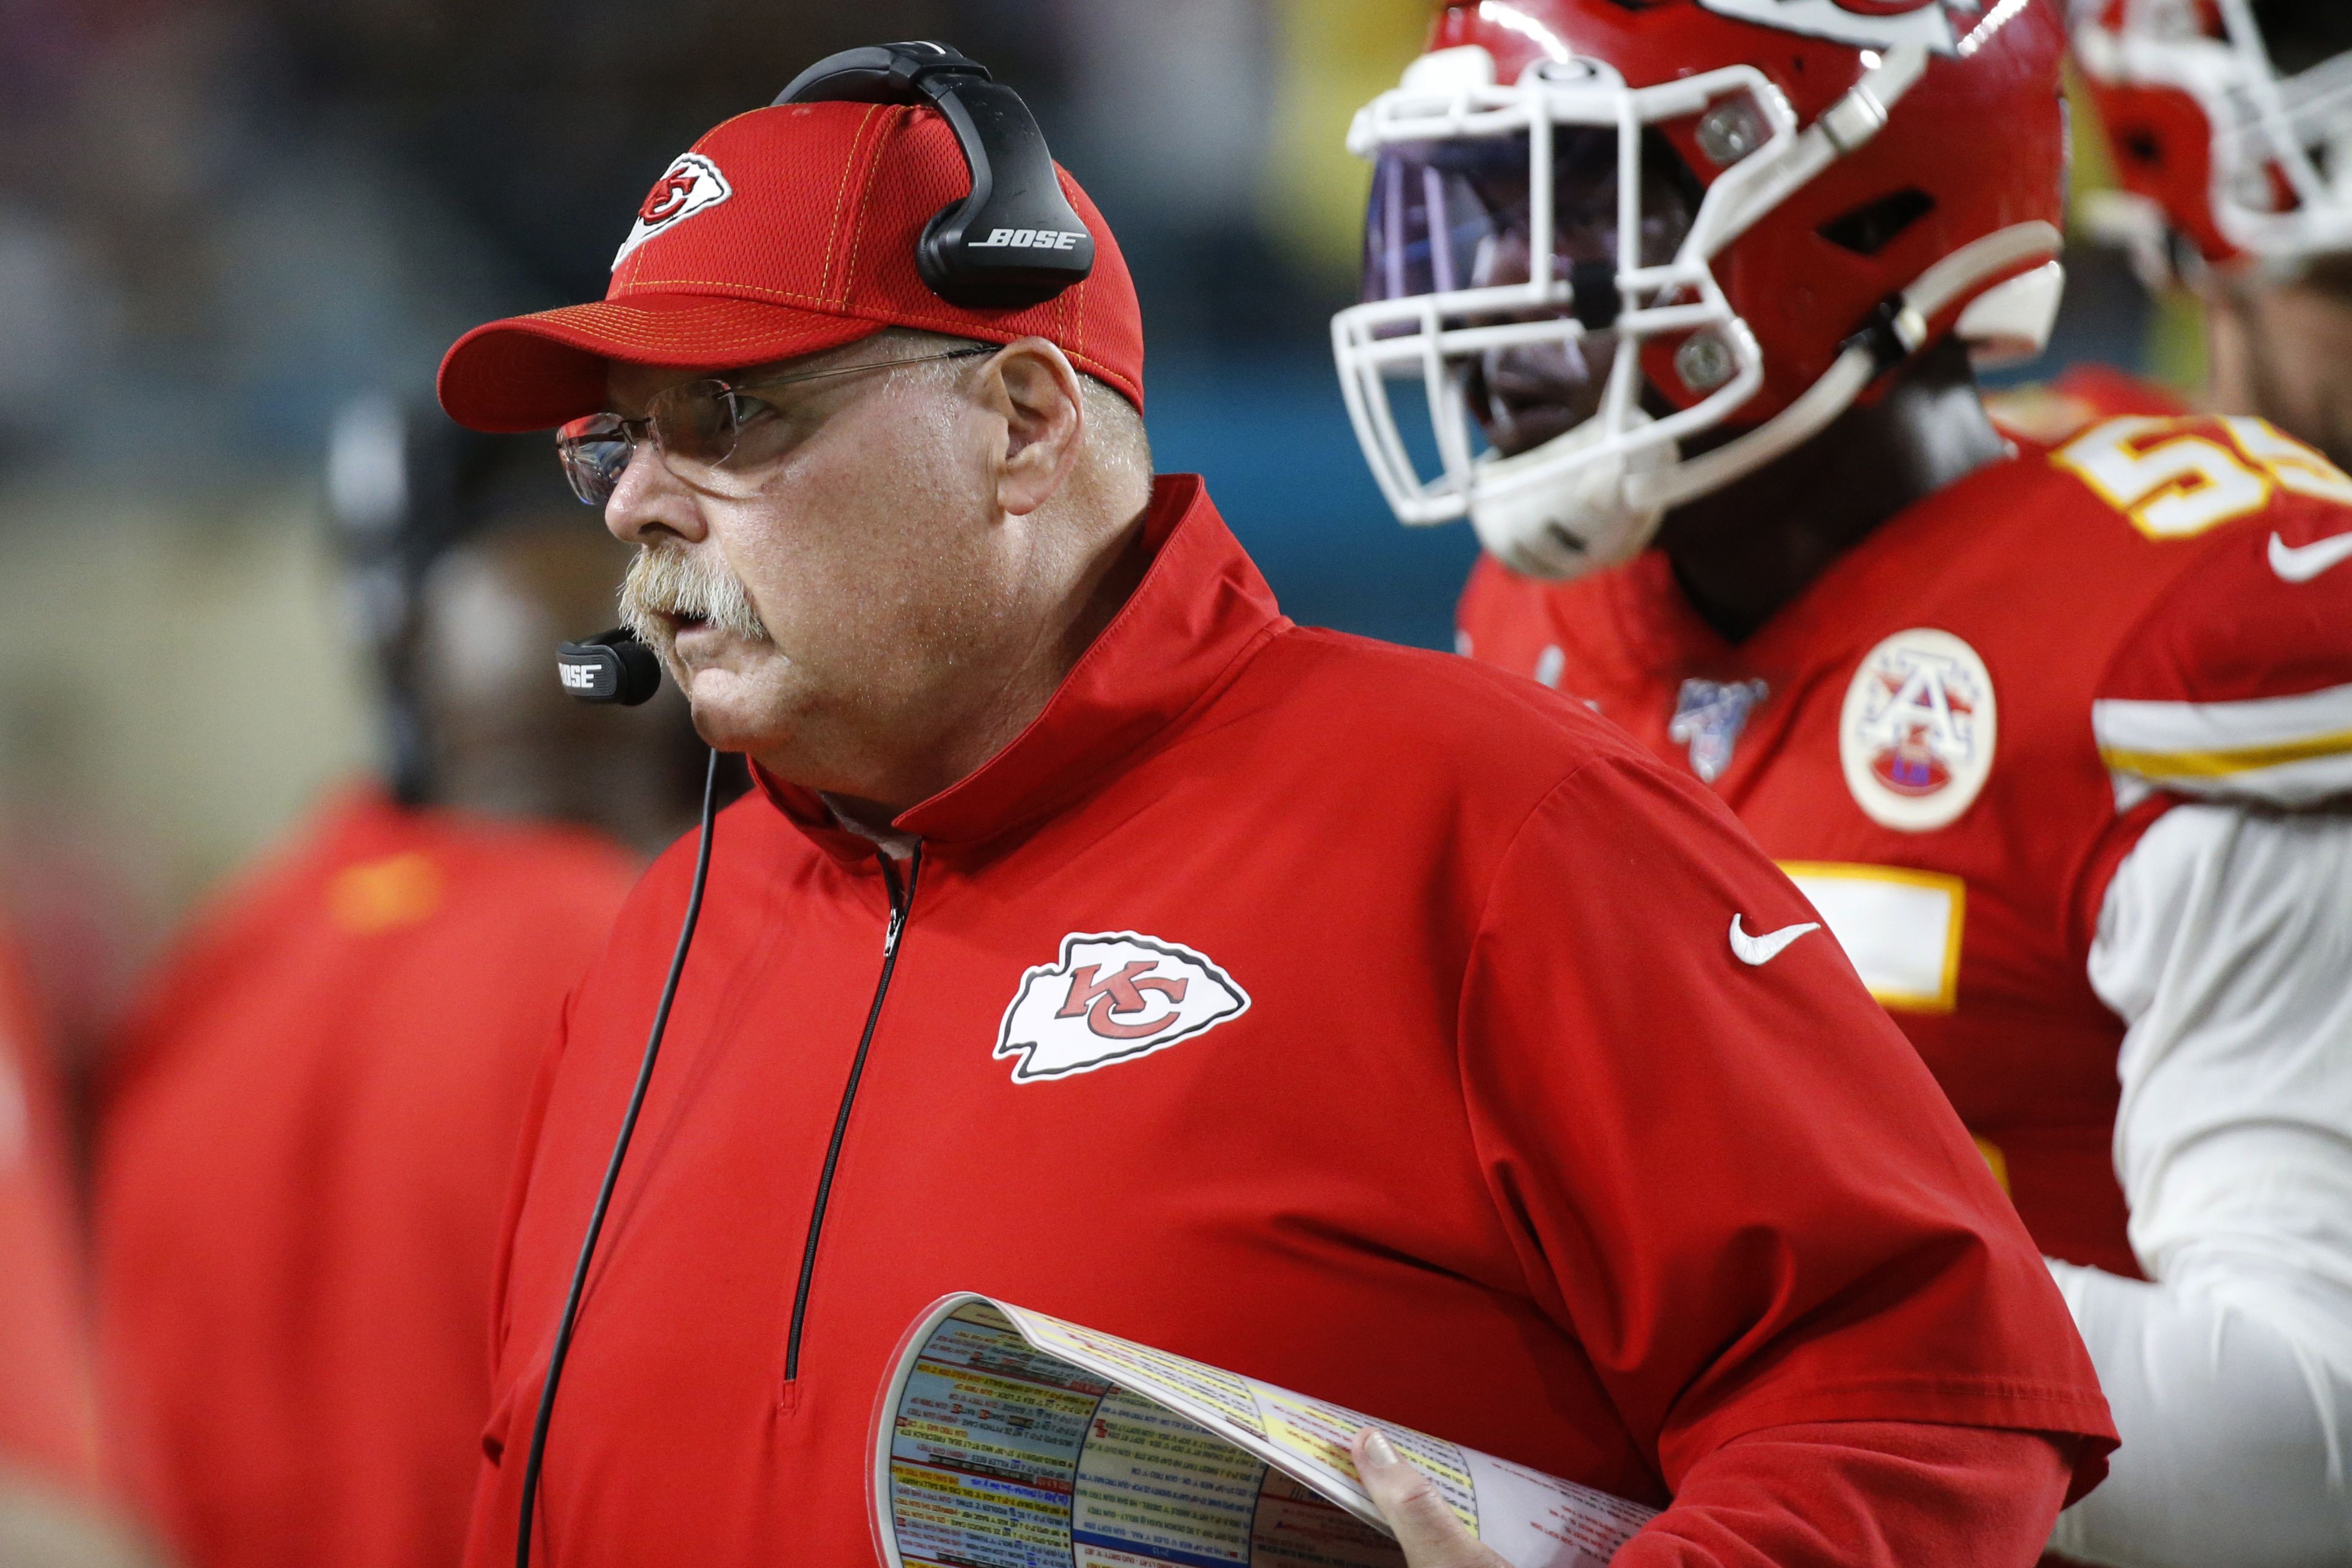 Super Bowl 2020: Chiefs' Andy Reid finally wins the big one vs. 49ers   Here's why ex-Eagles coach was able to win elusive Lombardi Trophy 